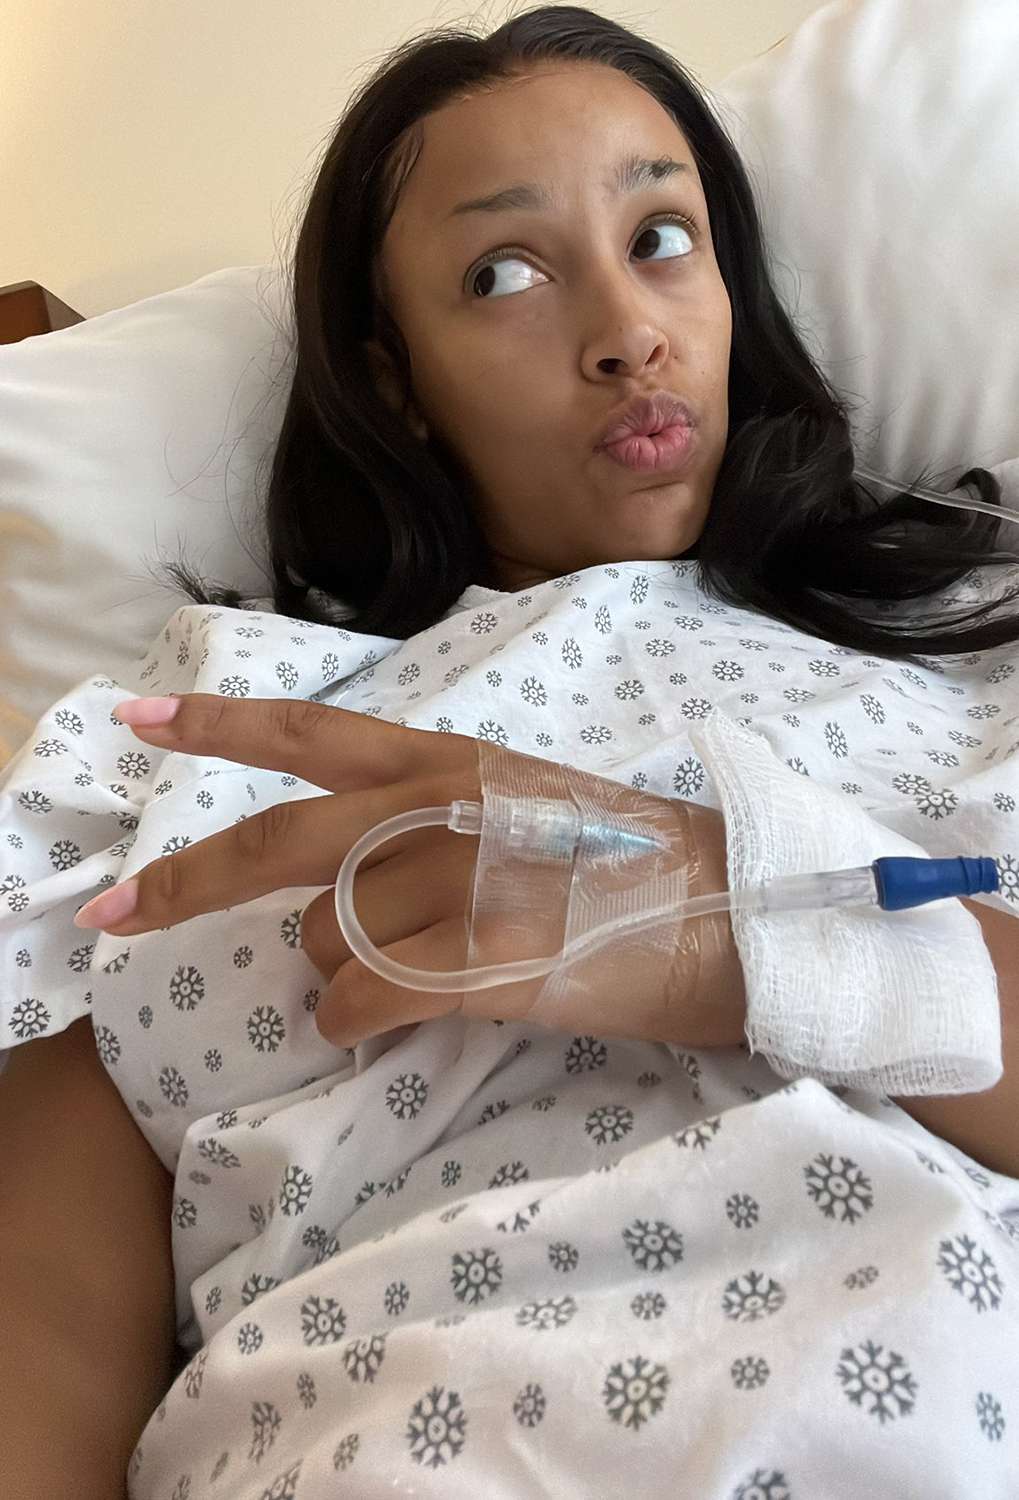 Doja Cat Shares Hospital Photos, Reveals Raspy Voice After Undergoing Tonsil Surgery from Infection